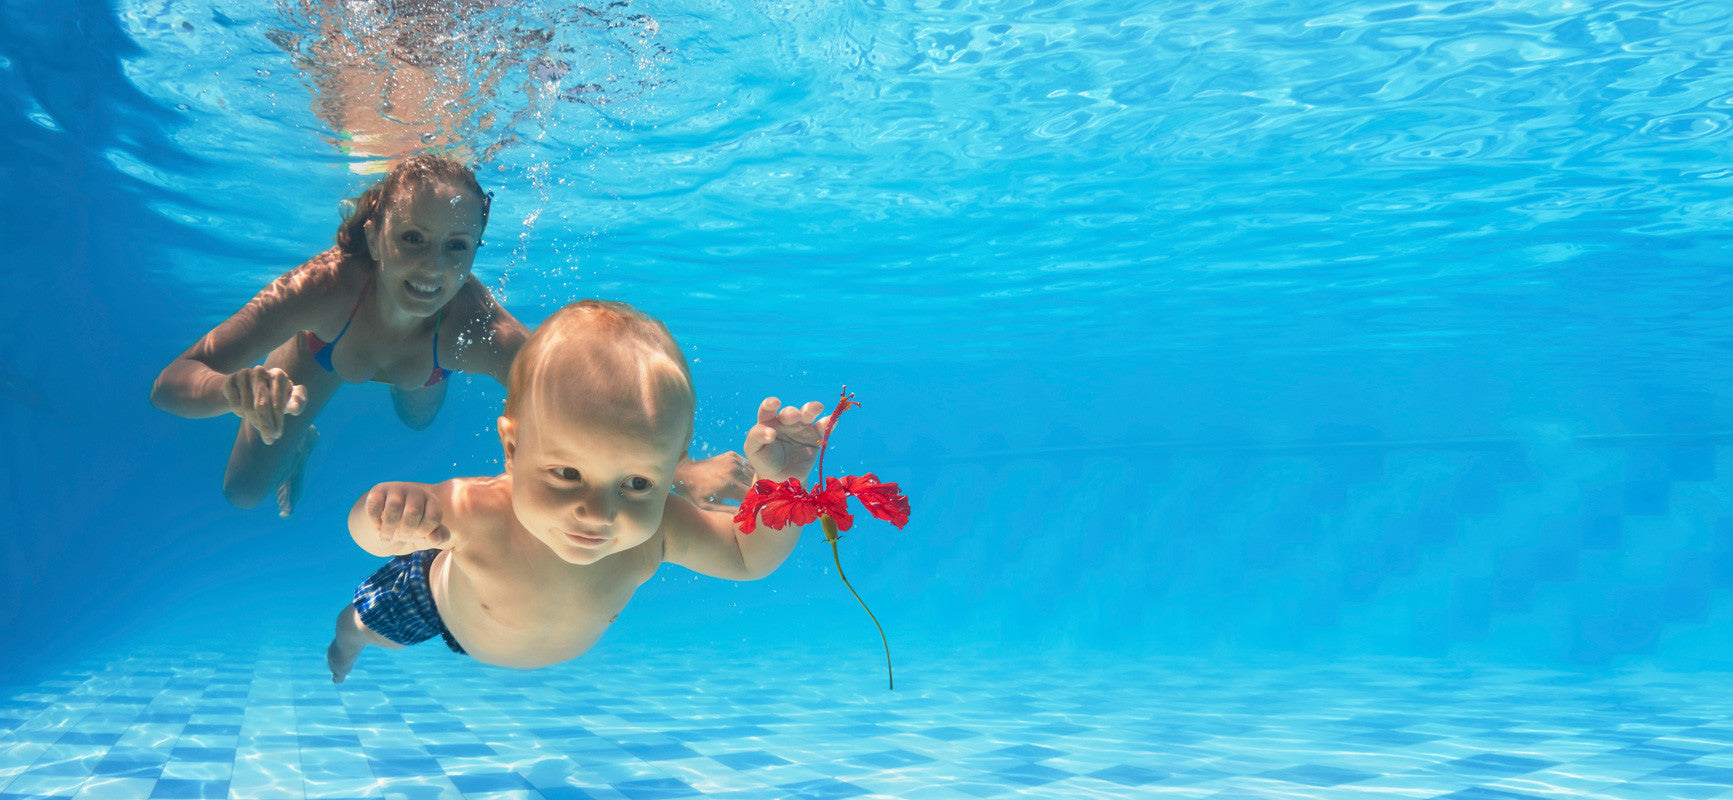 We’ll make your pool fresh, clean and ready for fun.